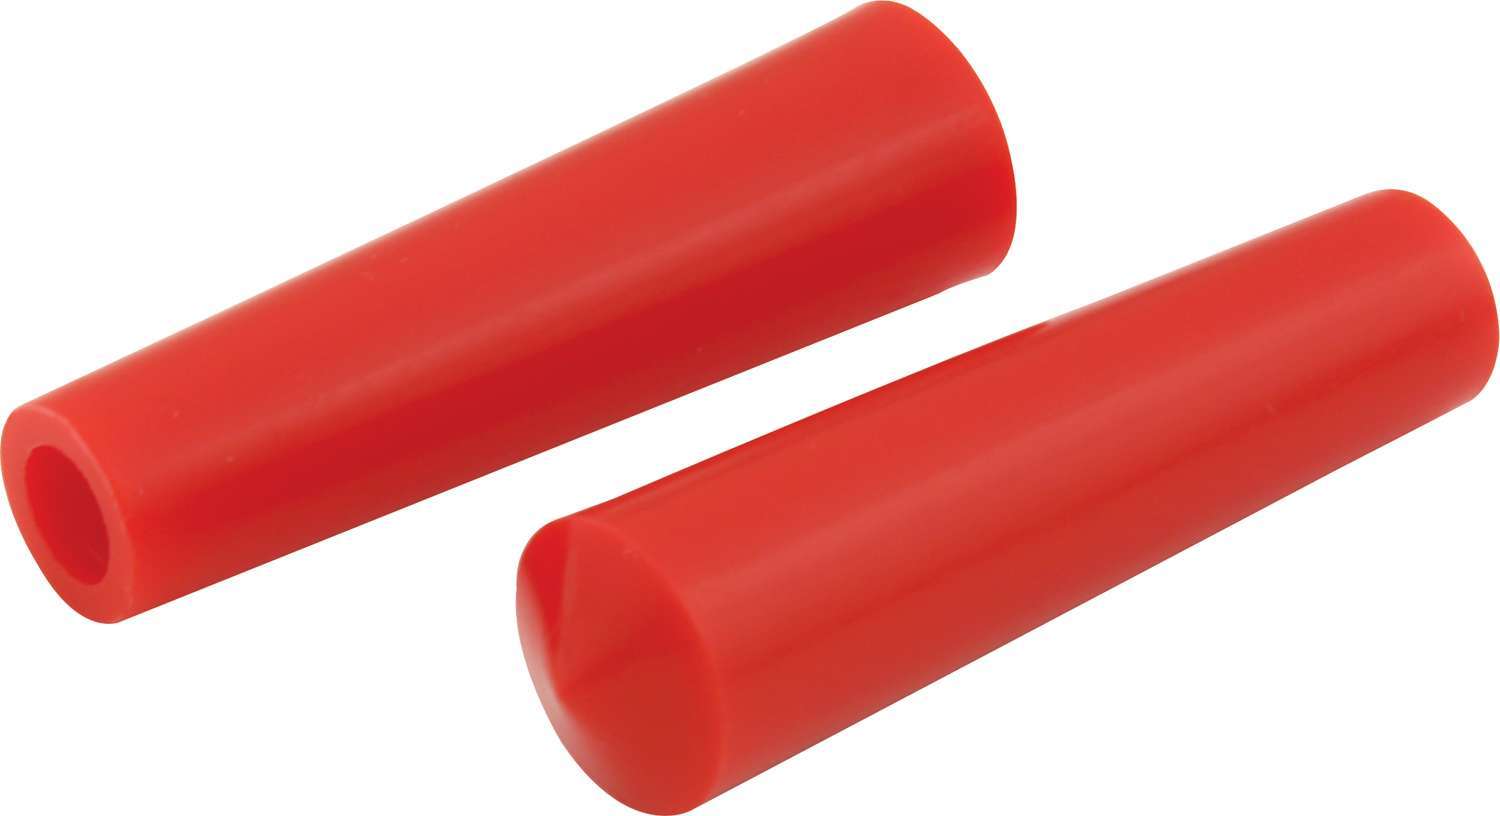 QuickCar 50-524 Toggle Switch Extension, Plastic, Red, Pair